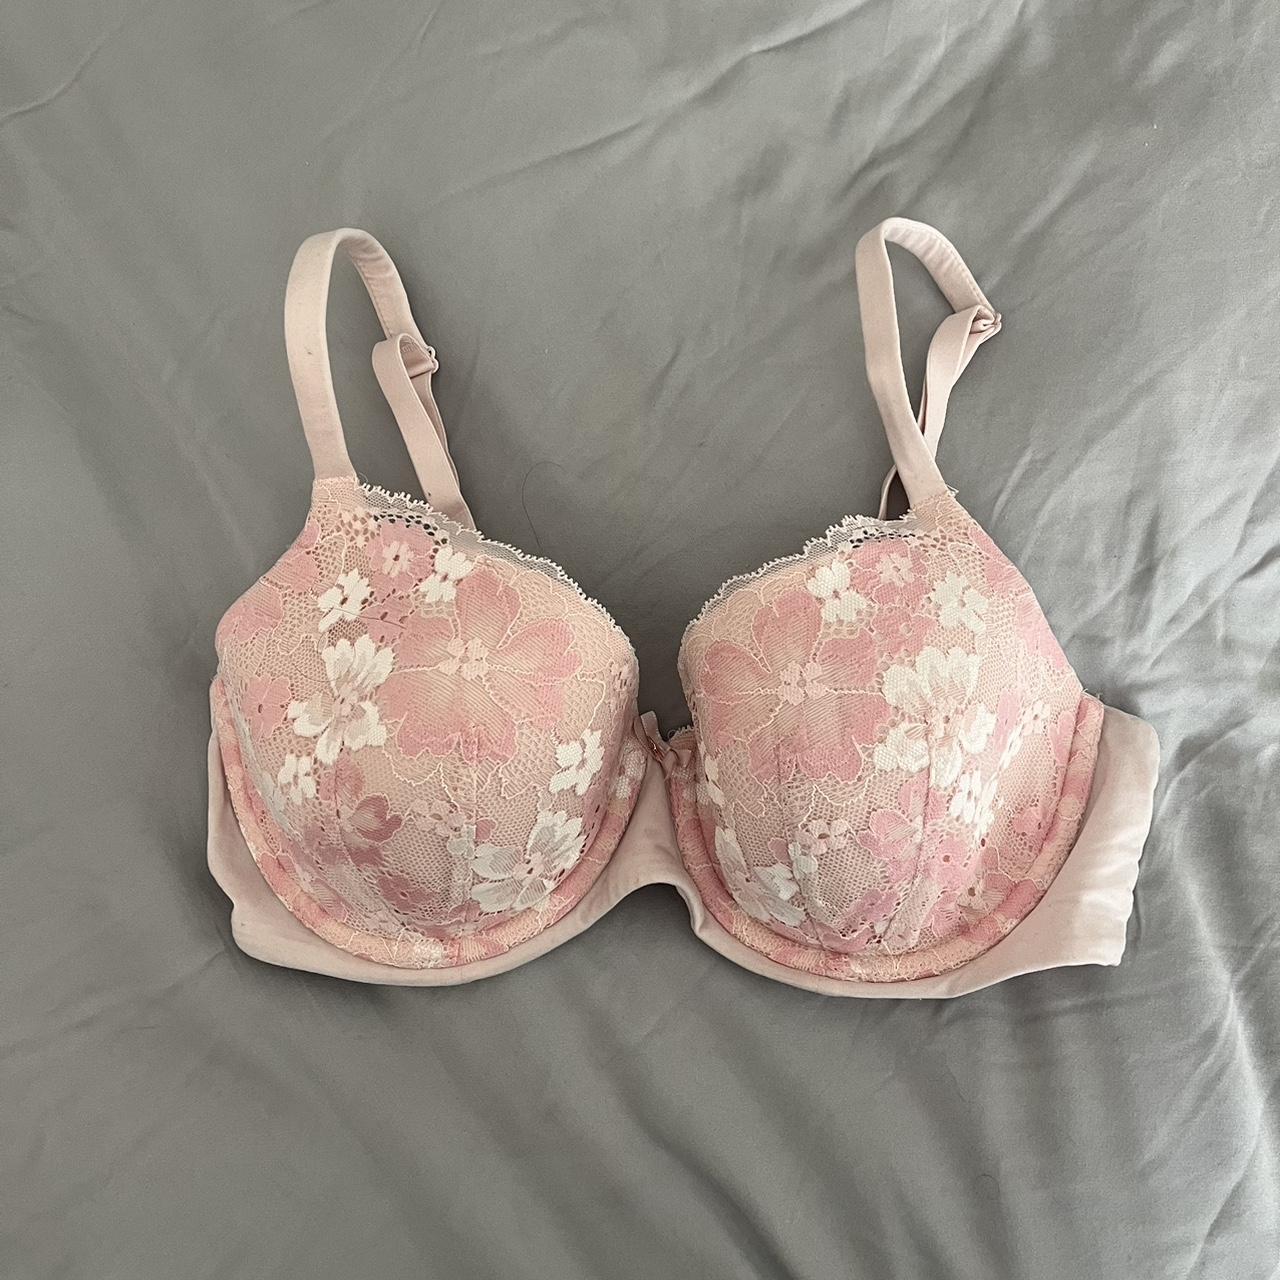 Sheer lace floral bra with bow •* size small •* - Depop